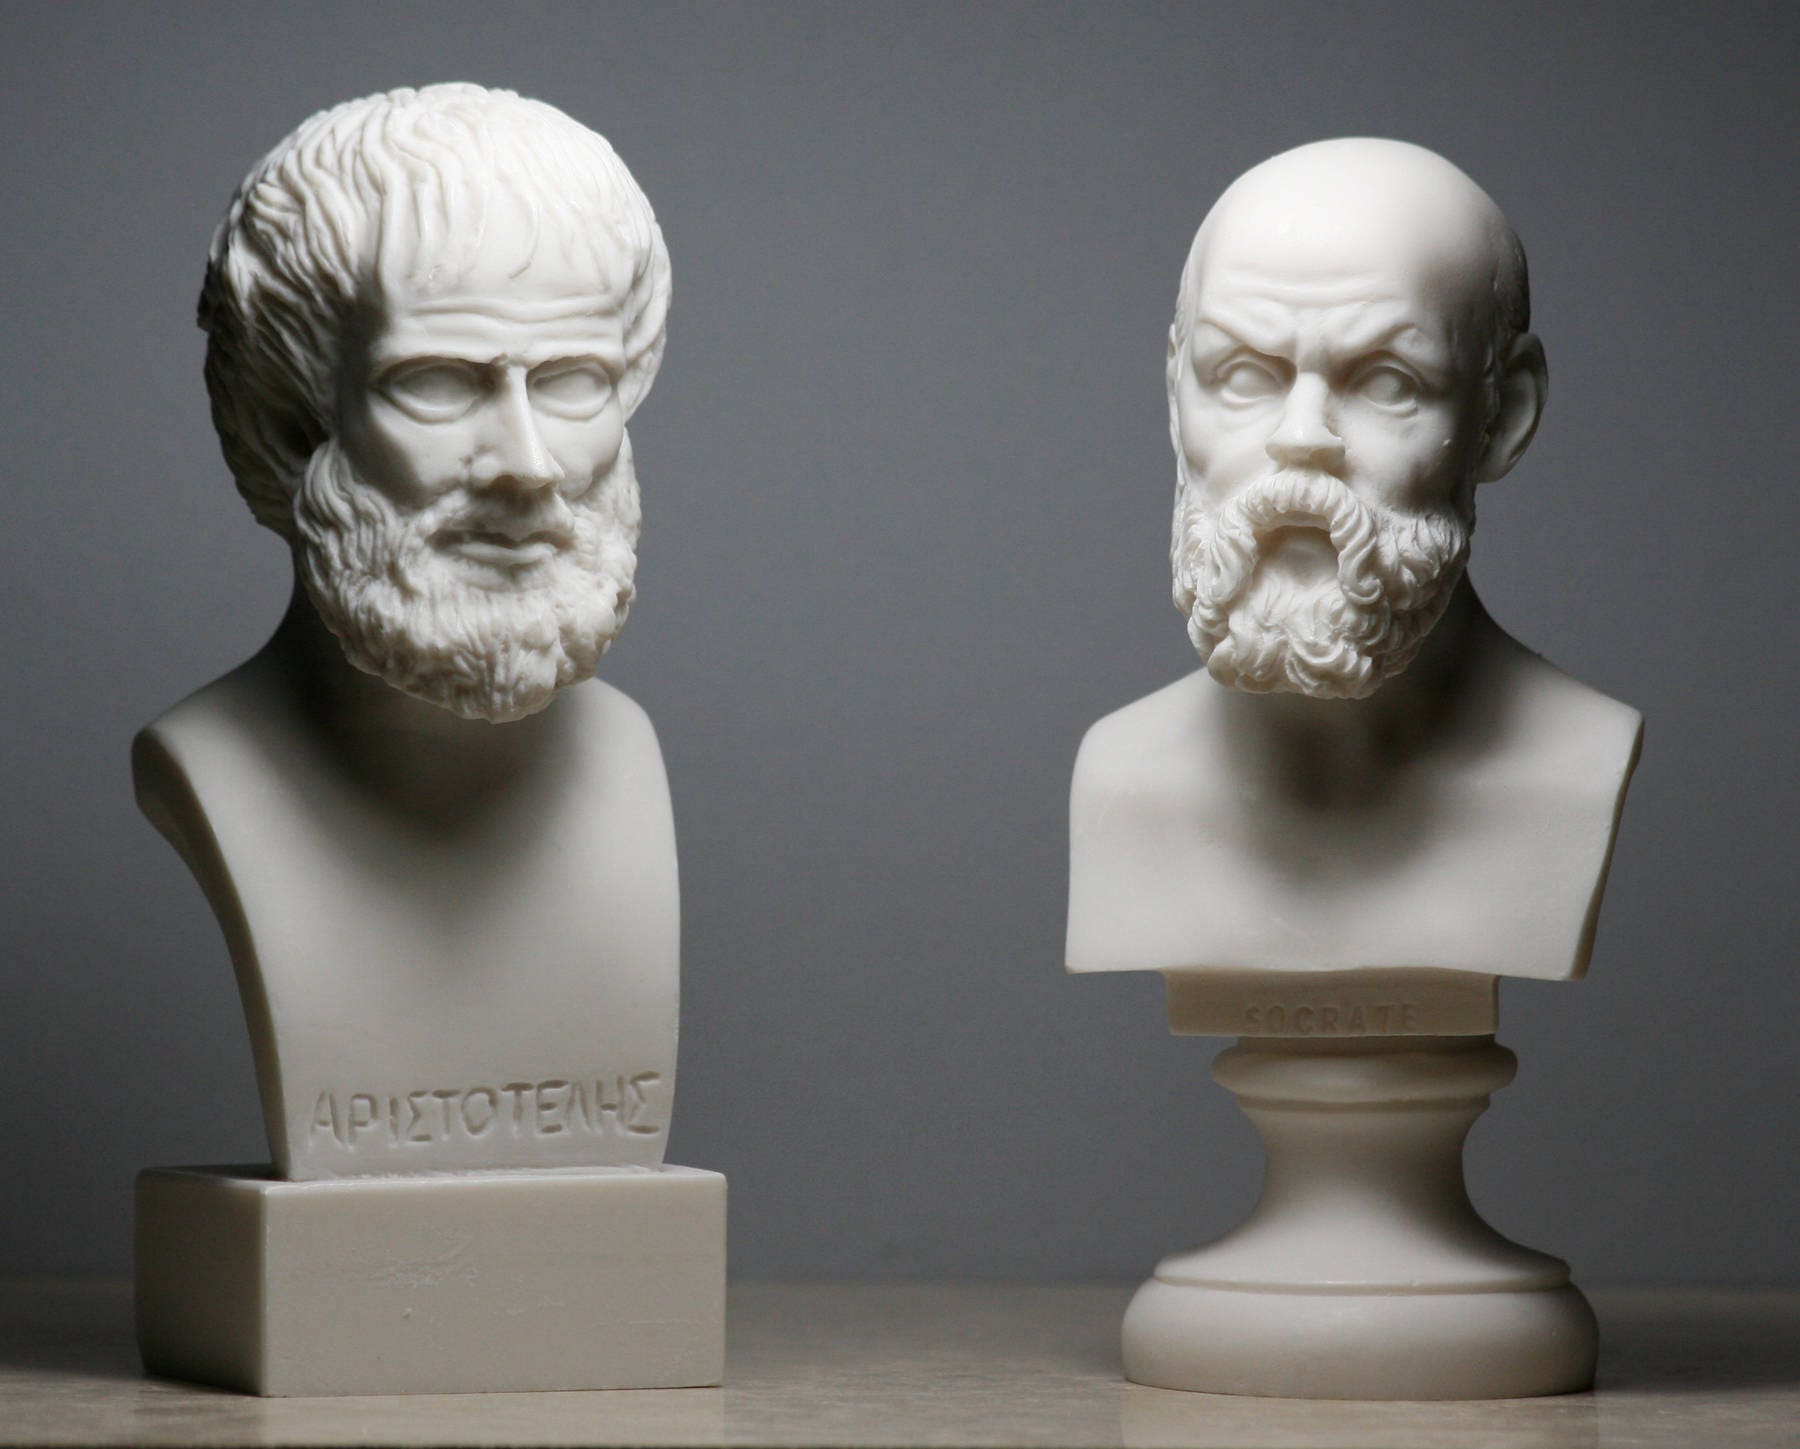 Details about   Socrates small aged Statue Western Philosophy Plato Aristotle Students 